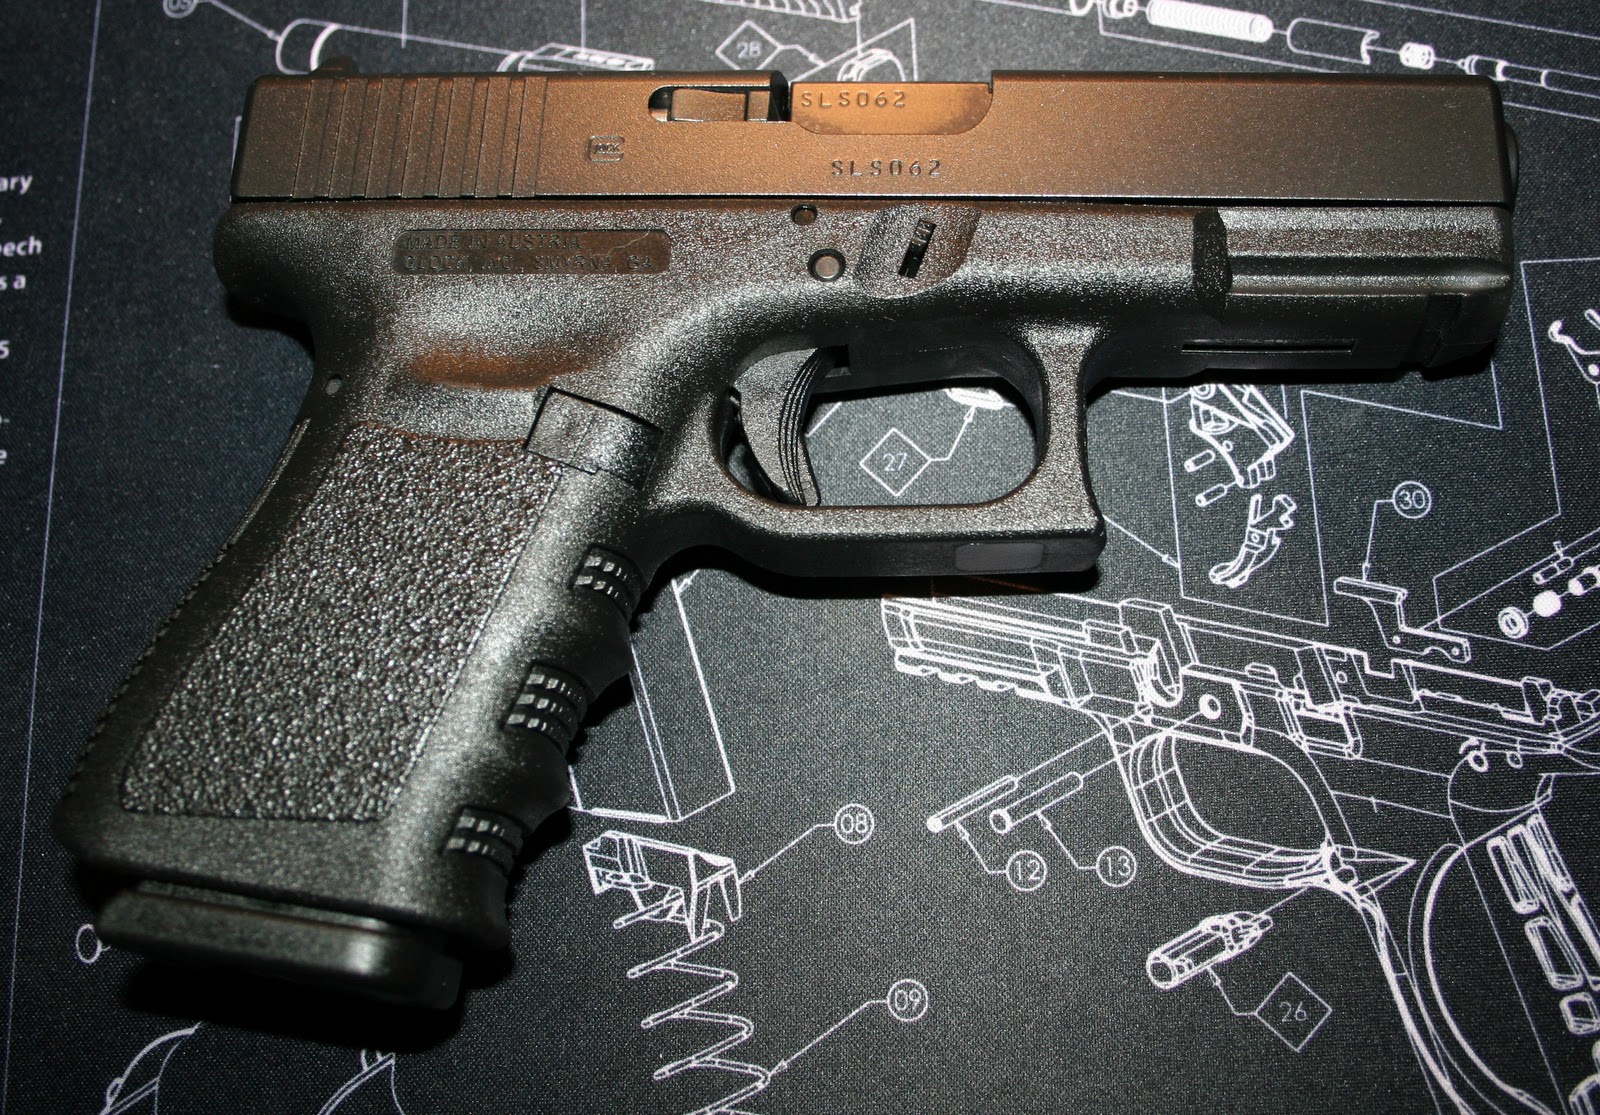 Monolithic Tactical: First Glock, Model 19 CCW